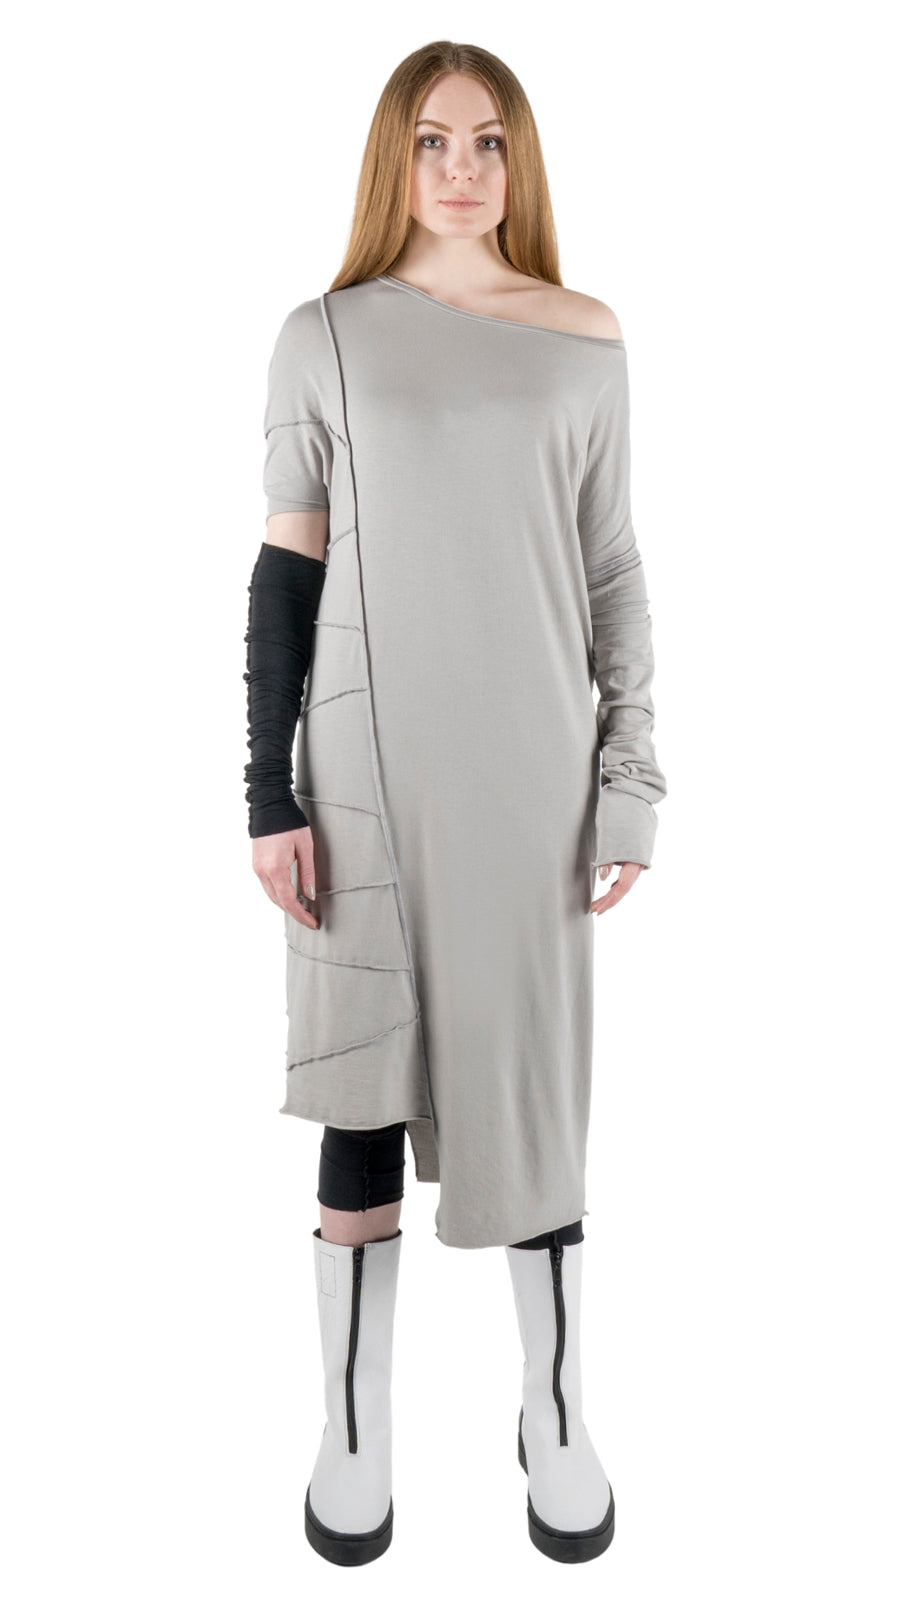 LOCO ONE REVOLUTION COLLECTION.  DRESS GRIGIO.  This is a longer version of our LOCO ONE TOP LATERAL with a wider neck line, the left sleeve is loose and extra long, the right side has a wing short sleeve. features the upside down seams all the way down the right side with raw asymmetric hems. This dress is loose fit.